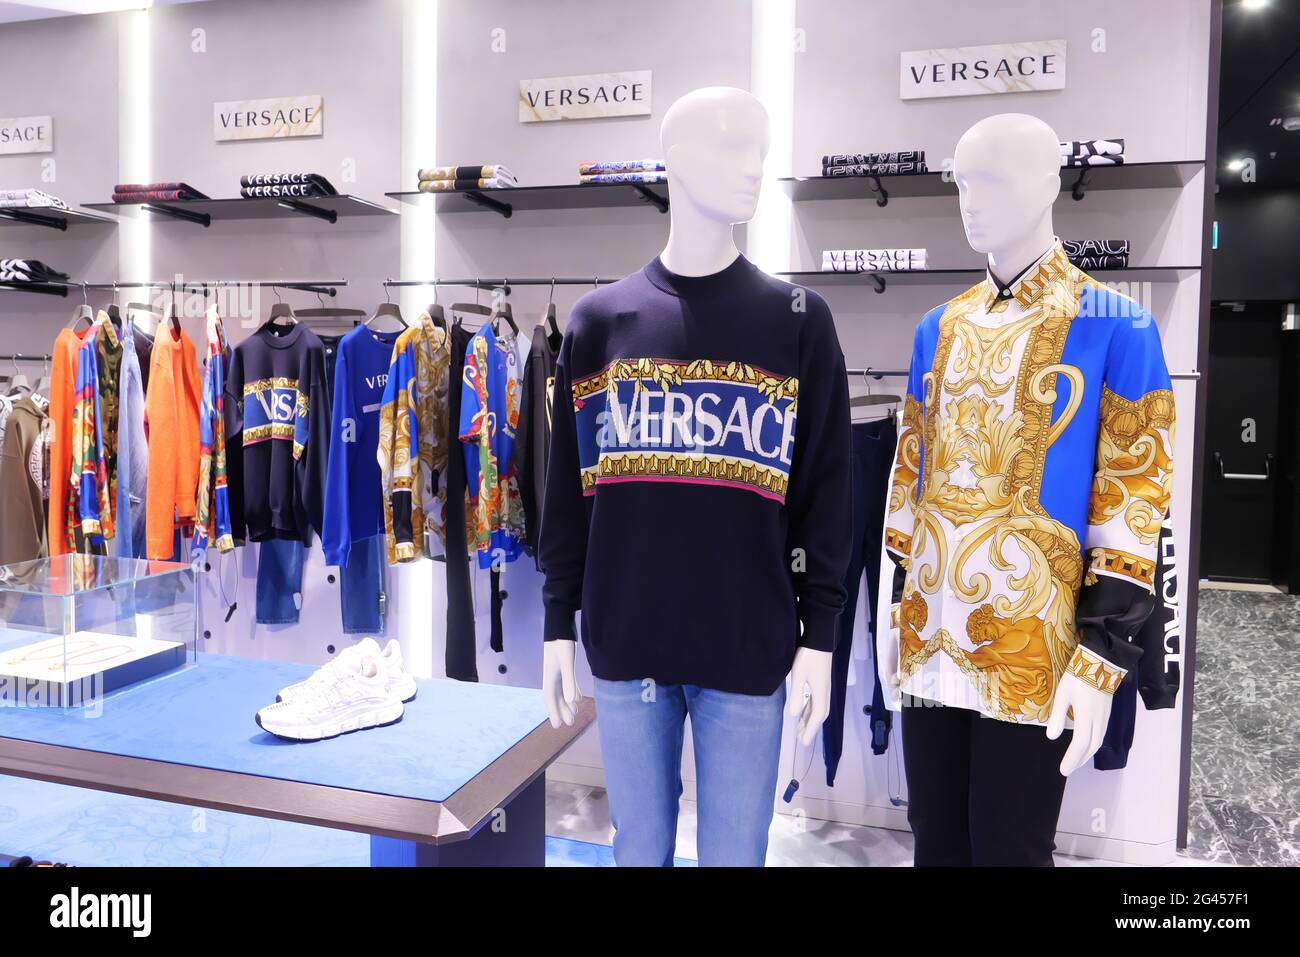 CLOTHES ON DISPLAY AT VERSACE BOUTIQUE INSIDE THE RINASCENTE